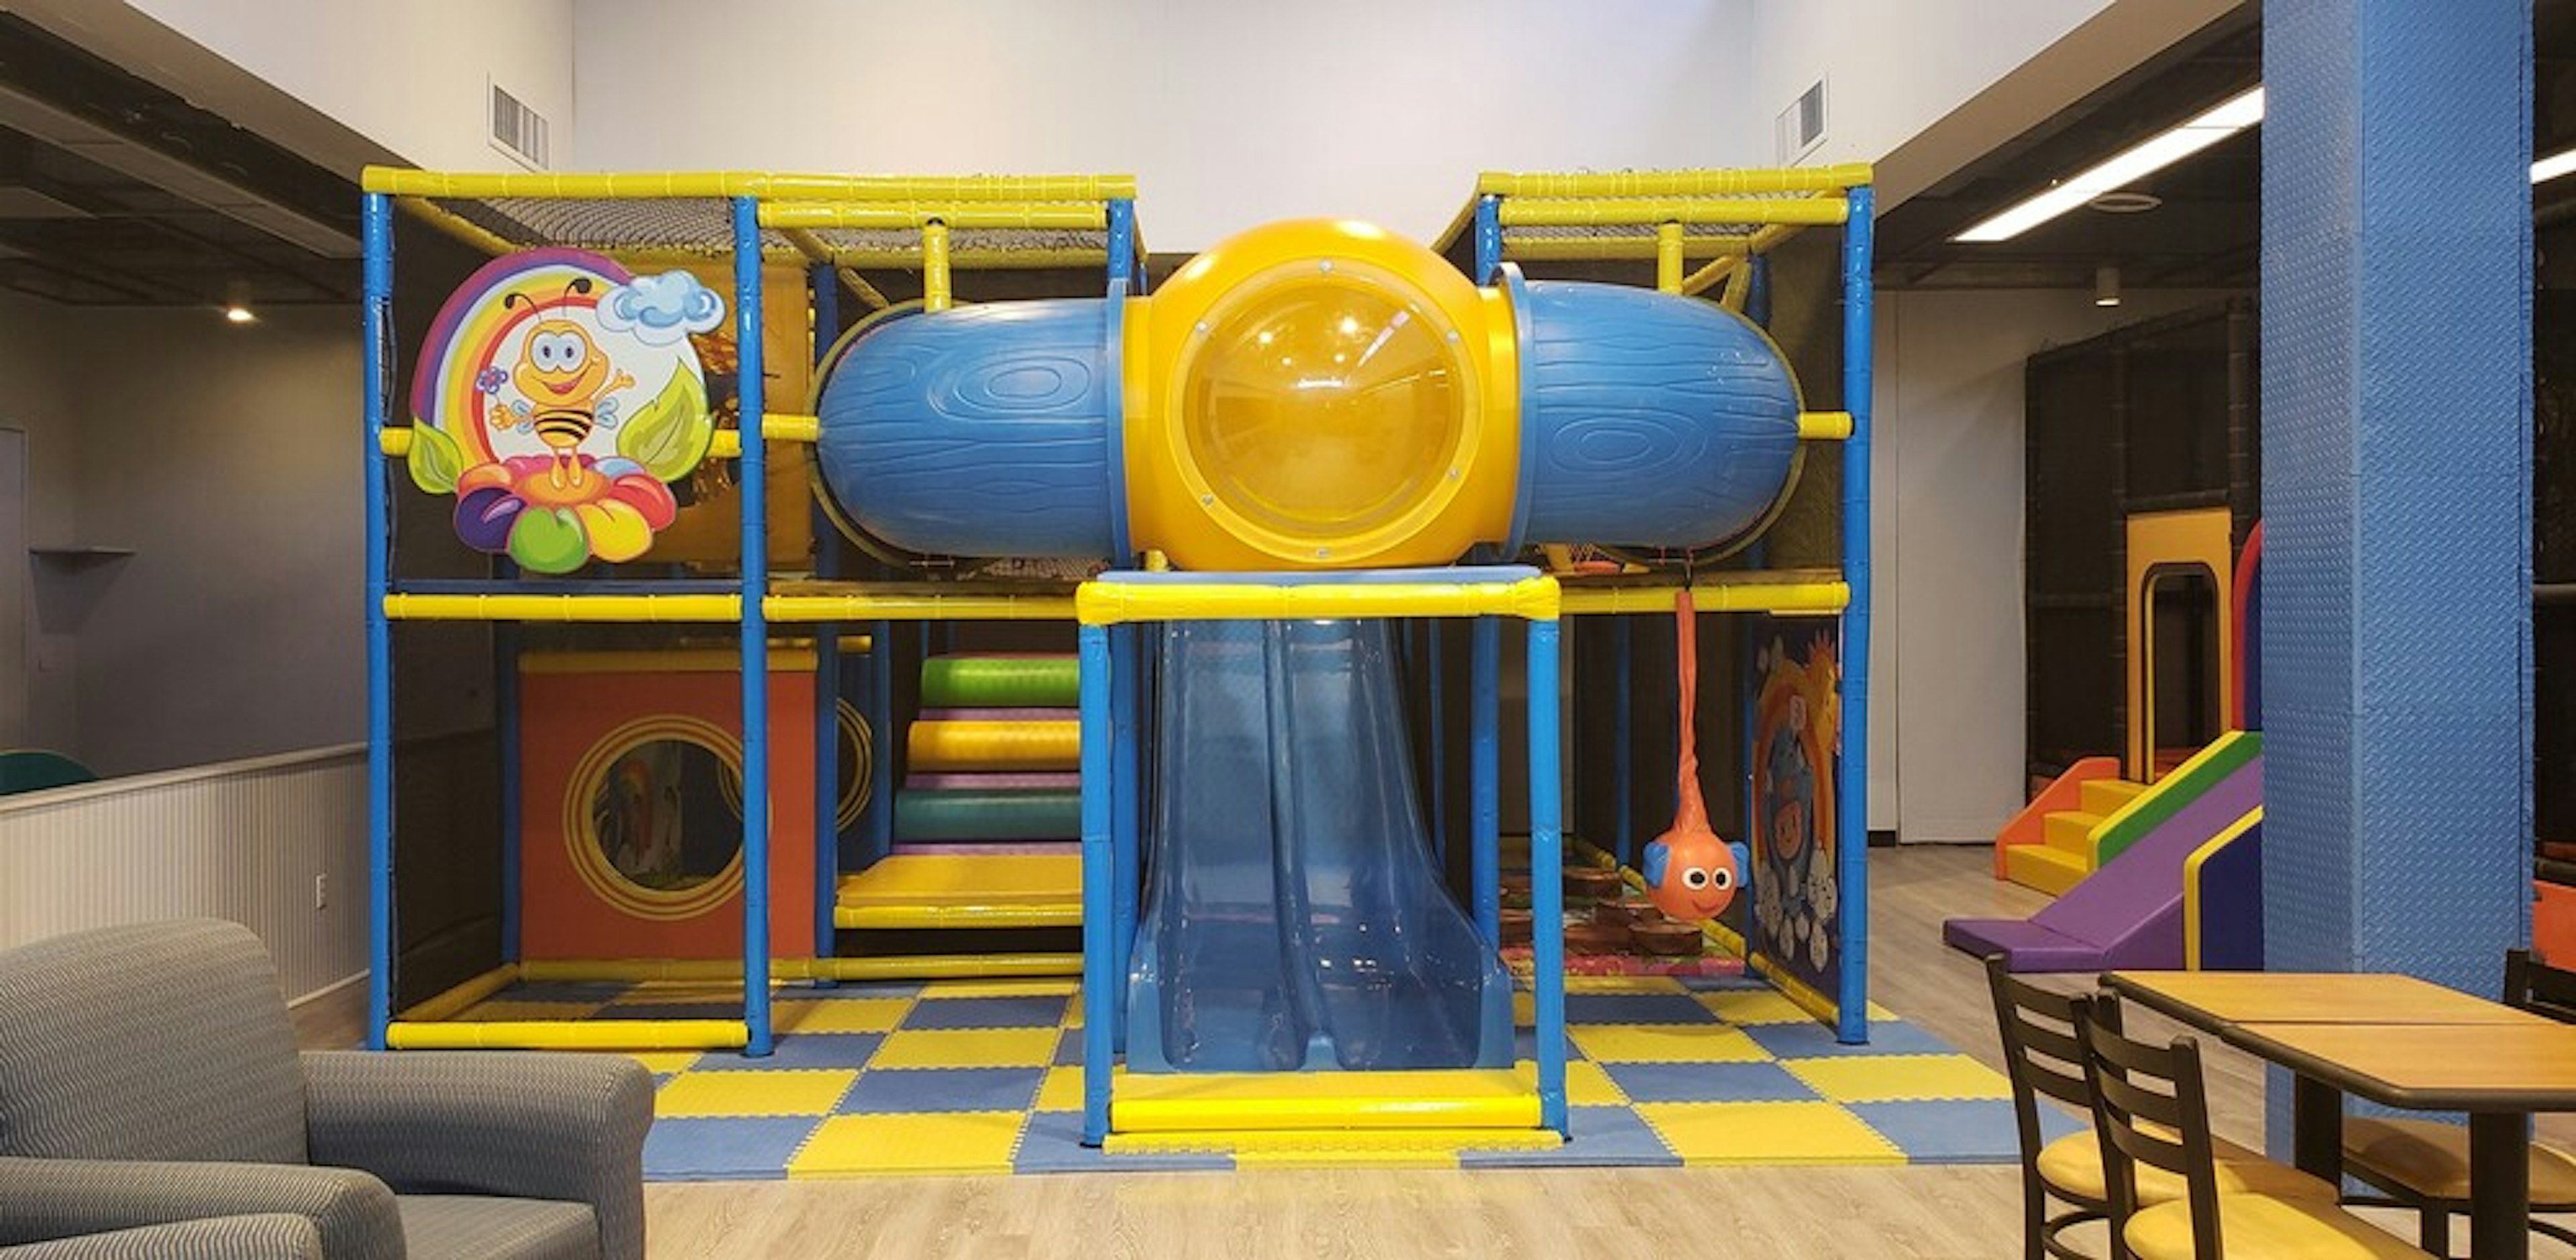 The Play Station Play Structure